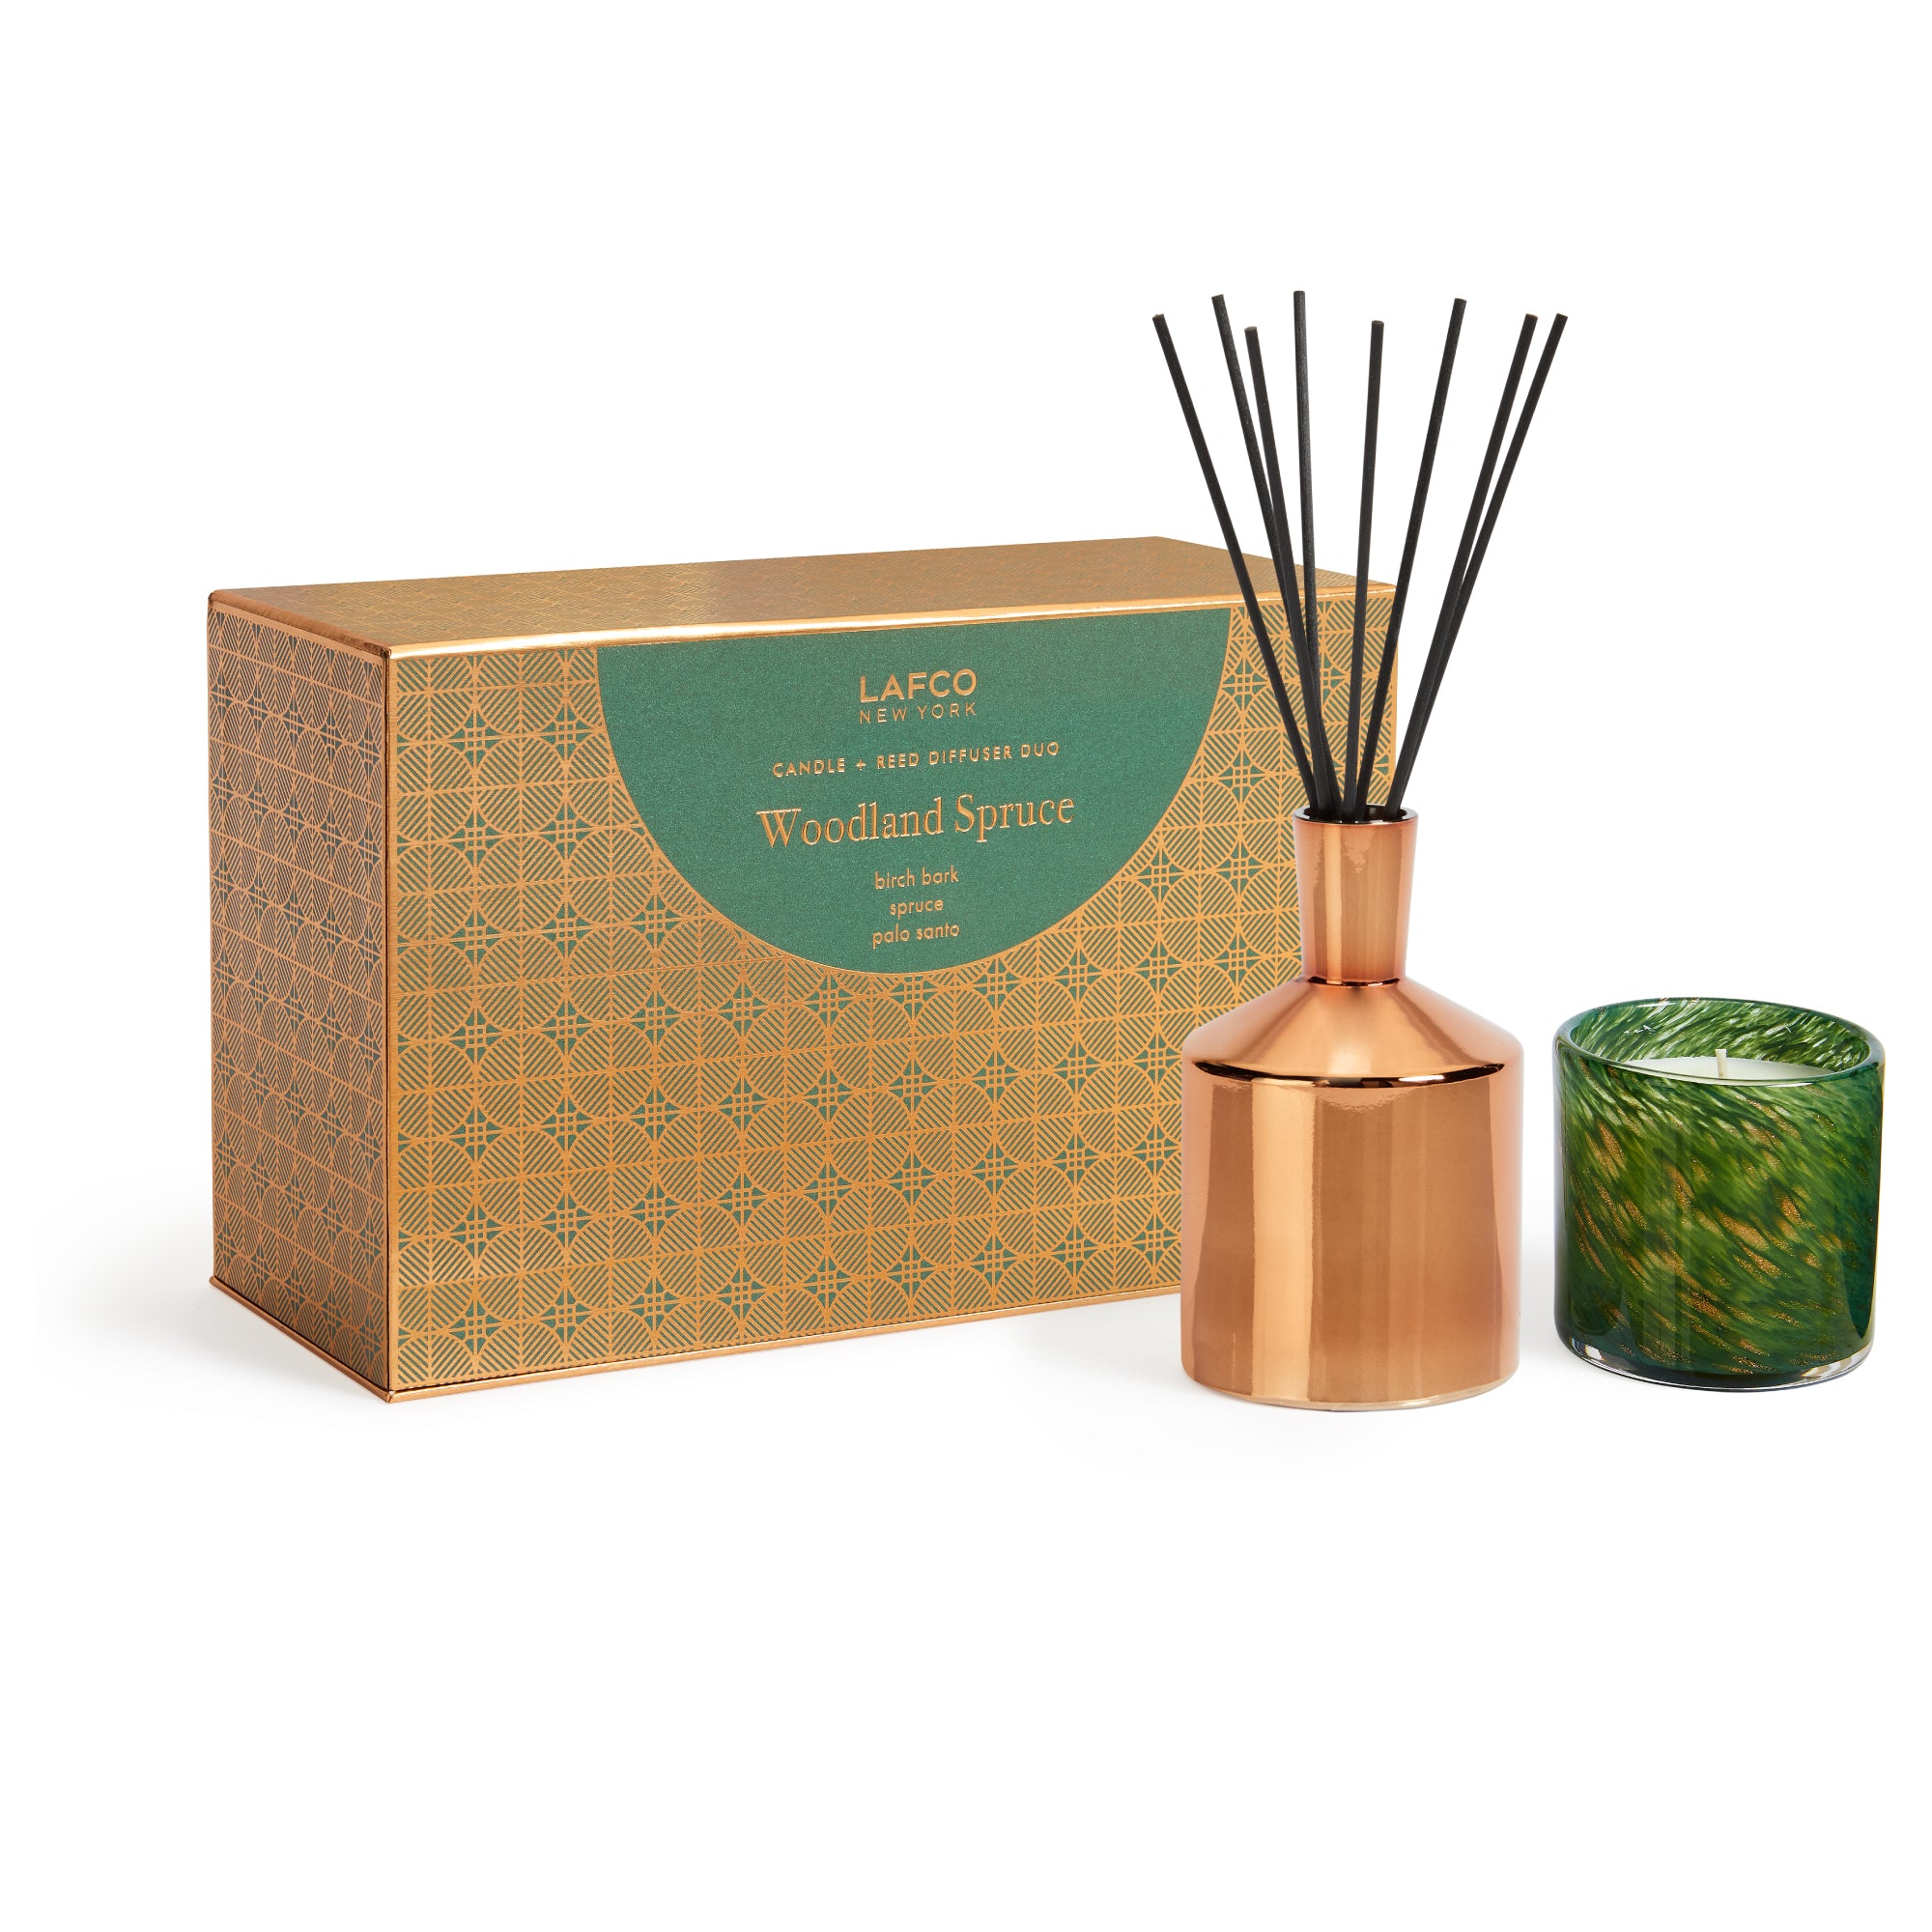 Classic Candle & Diffuser Duo Woodland Spruce